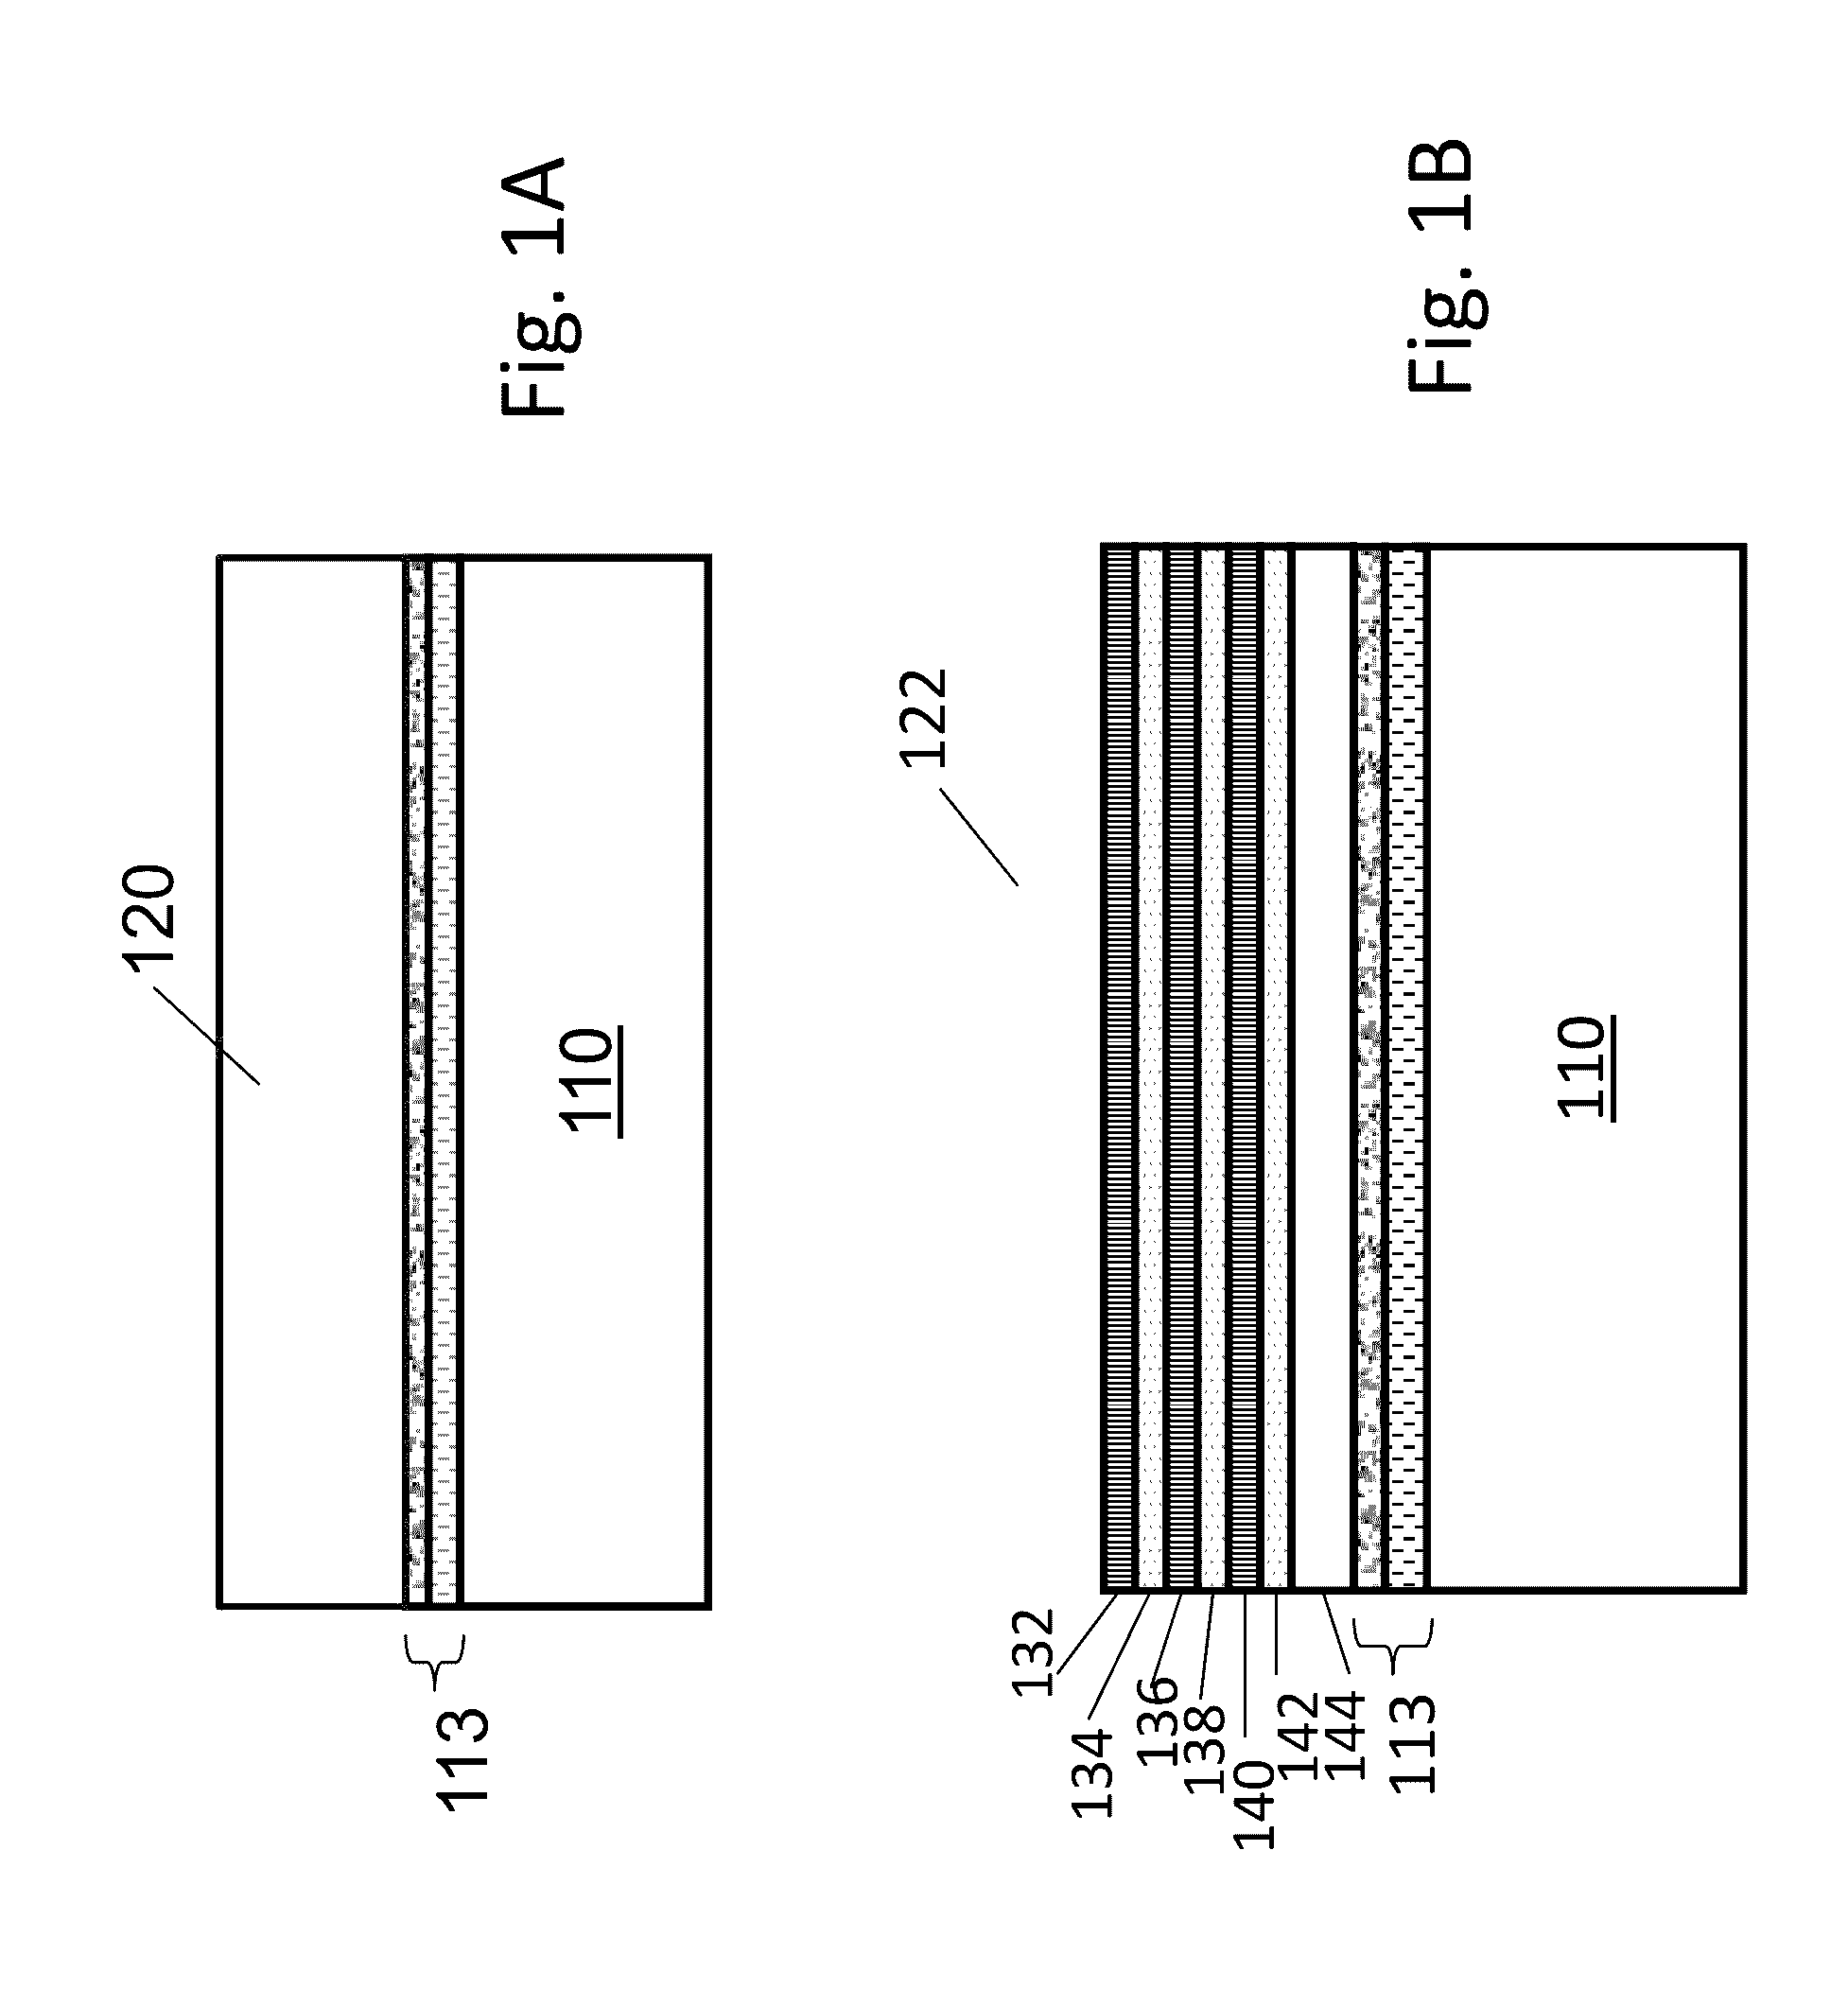 Semiconductor memory device and structure